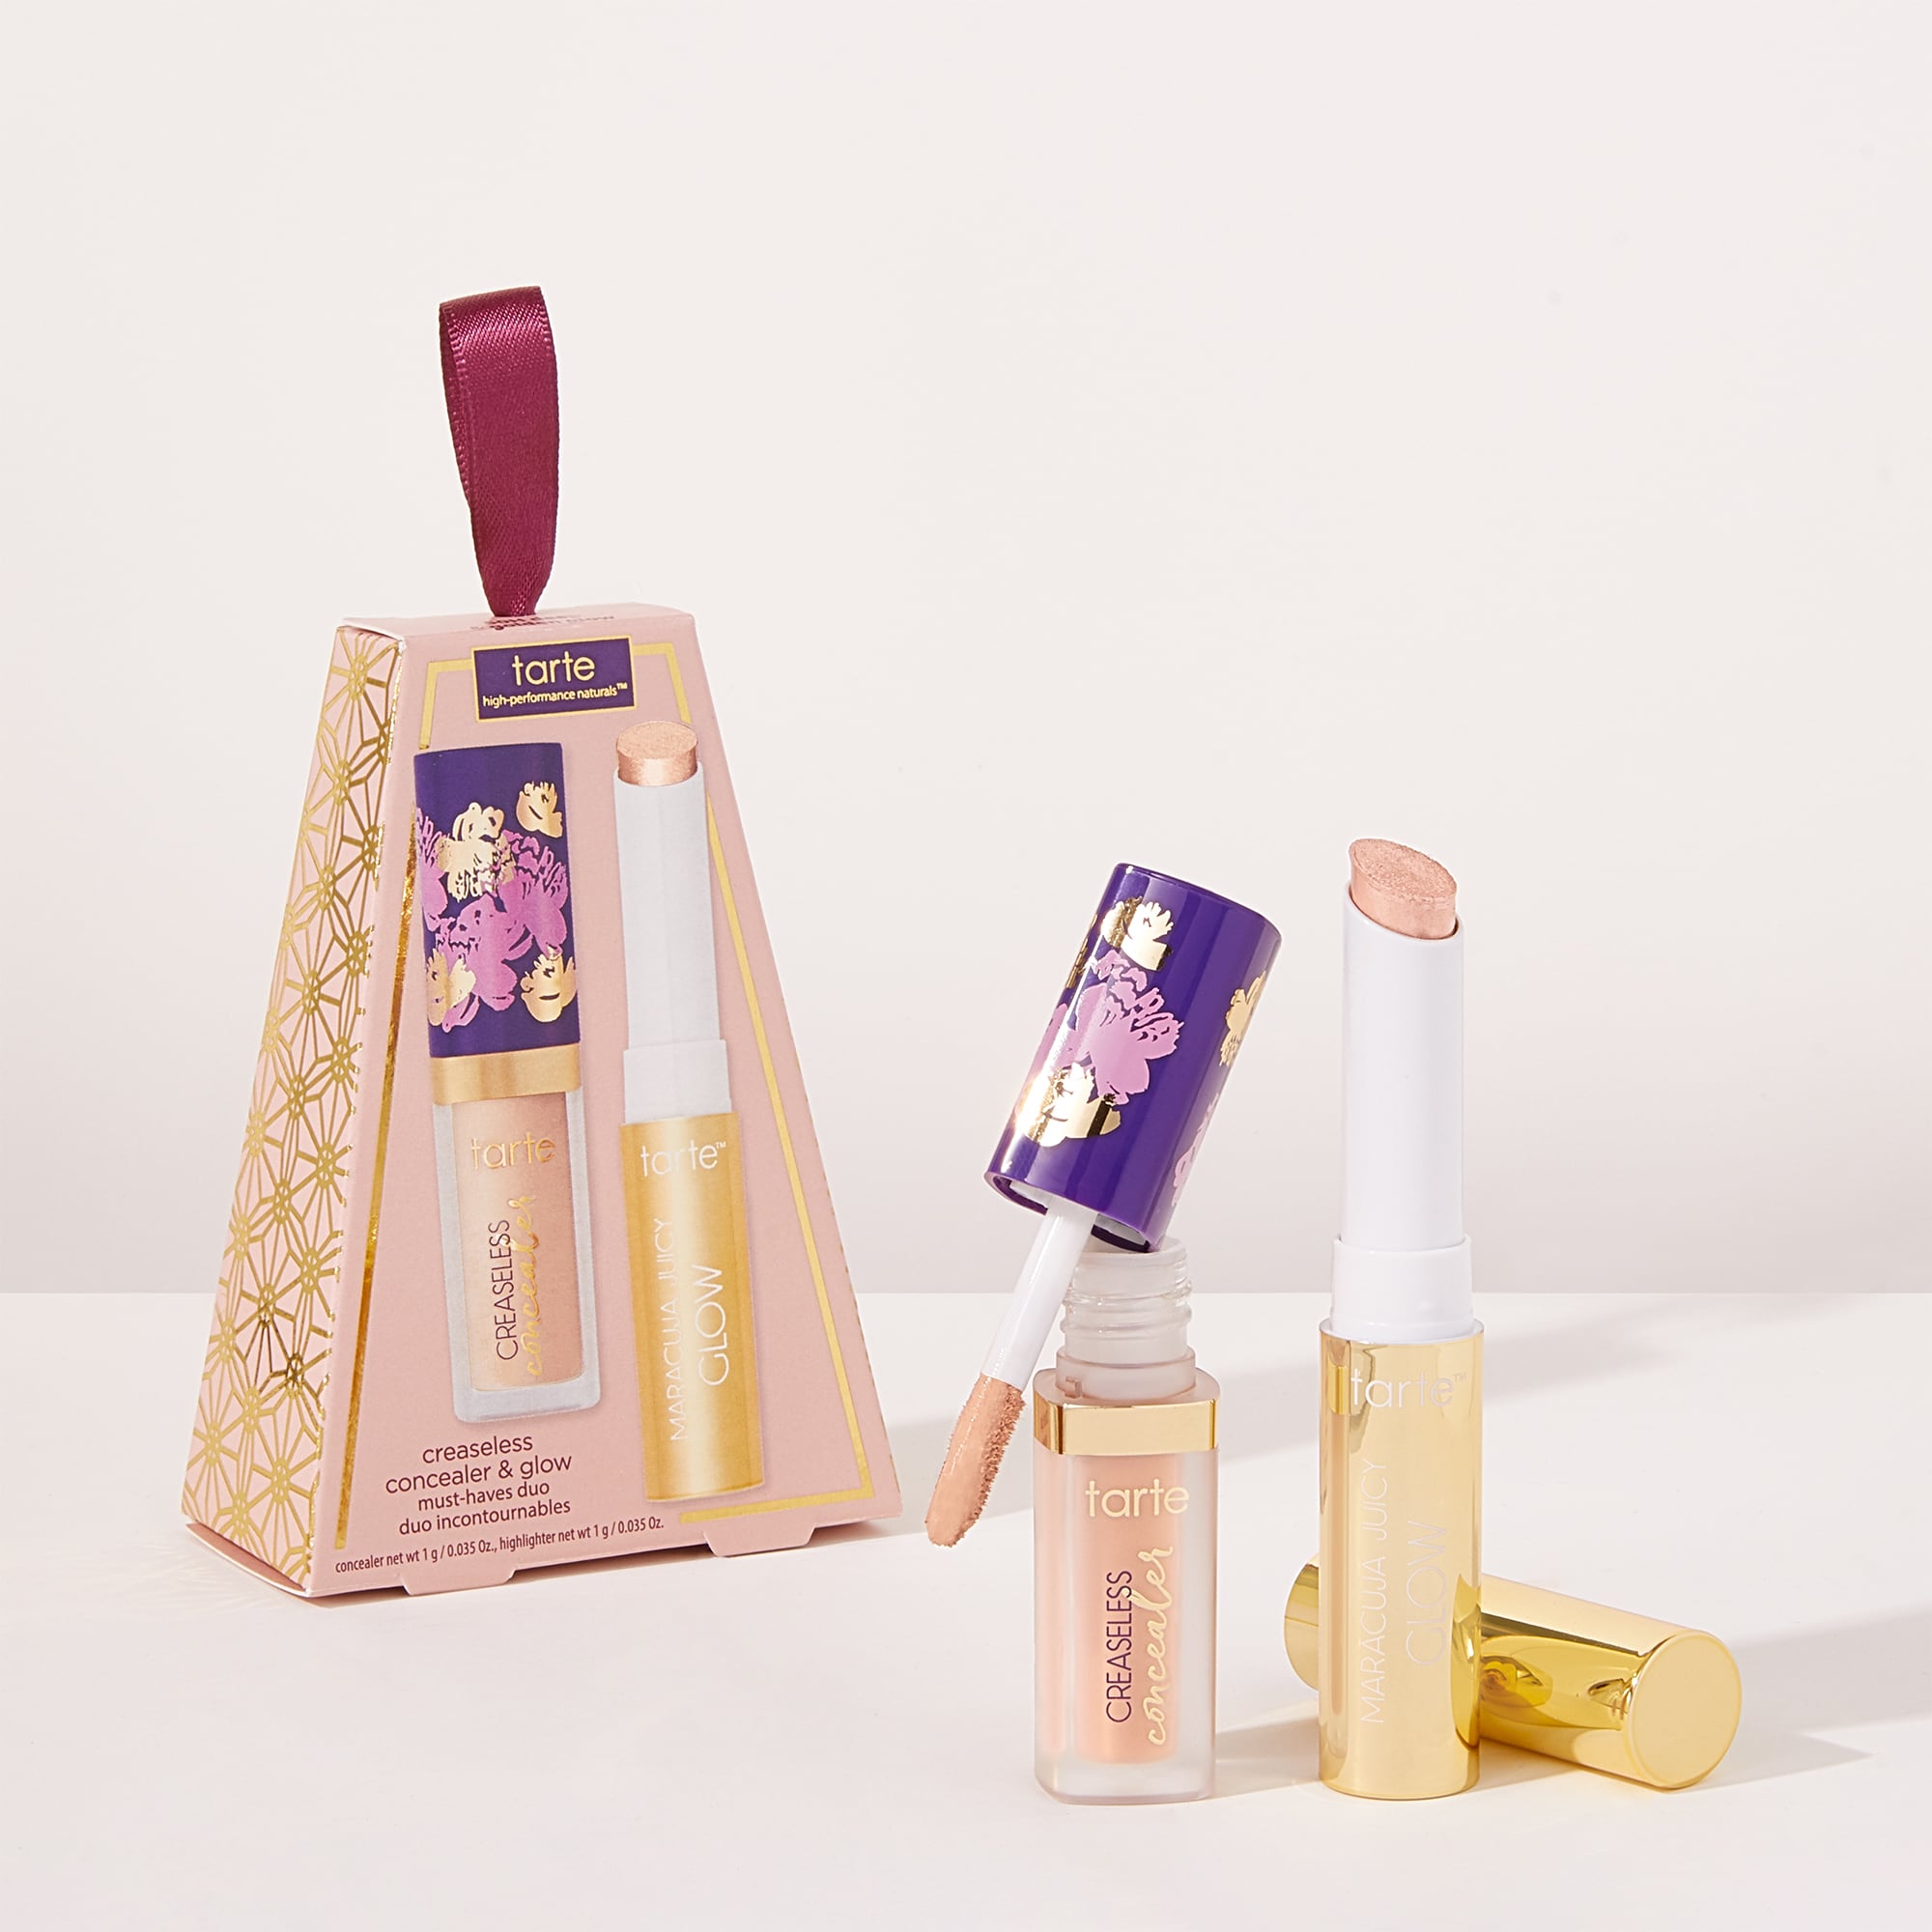 Tarte Cosmetics Creaseless Concealer & Glow Must-haves Duo In Neutral